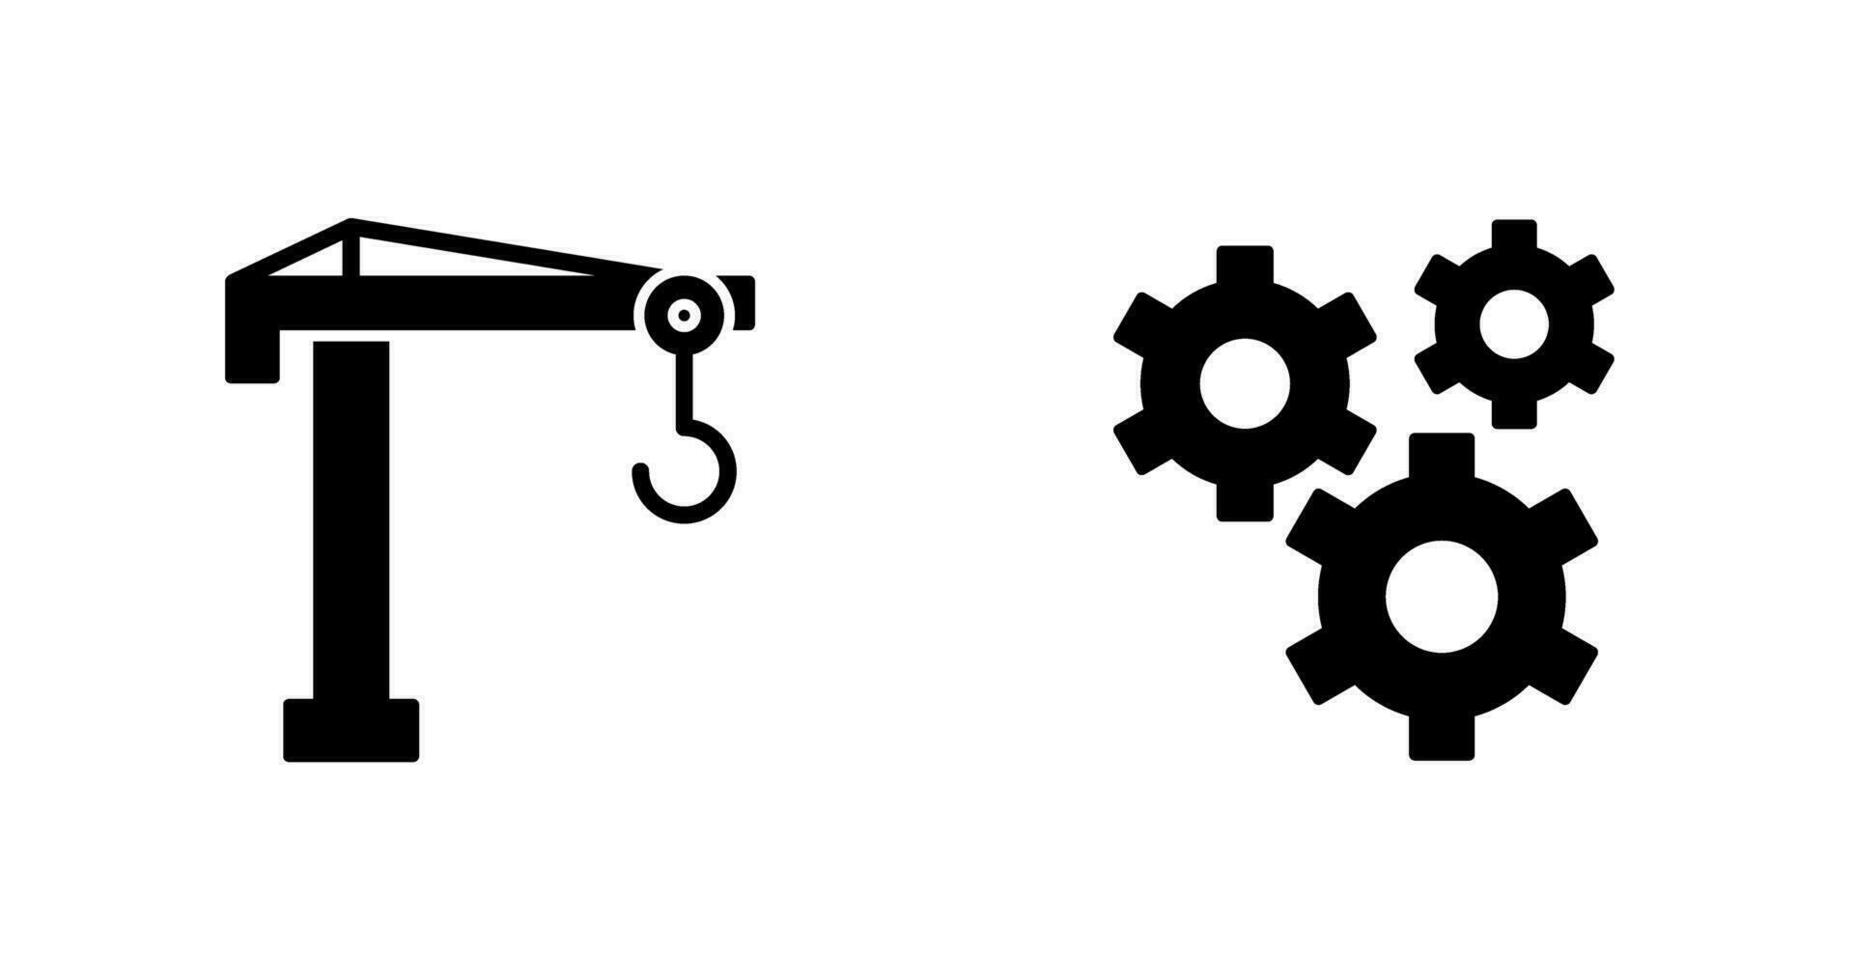 Crane and Gears Icon vector